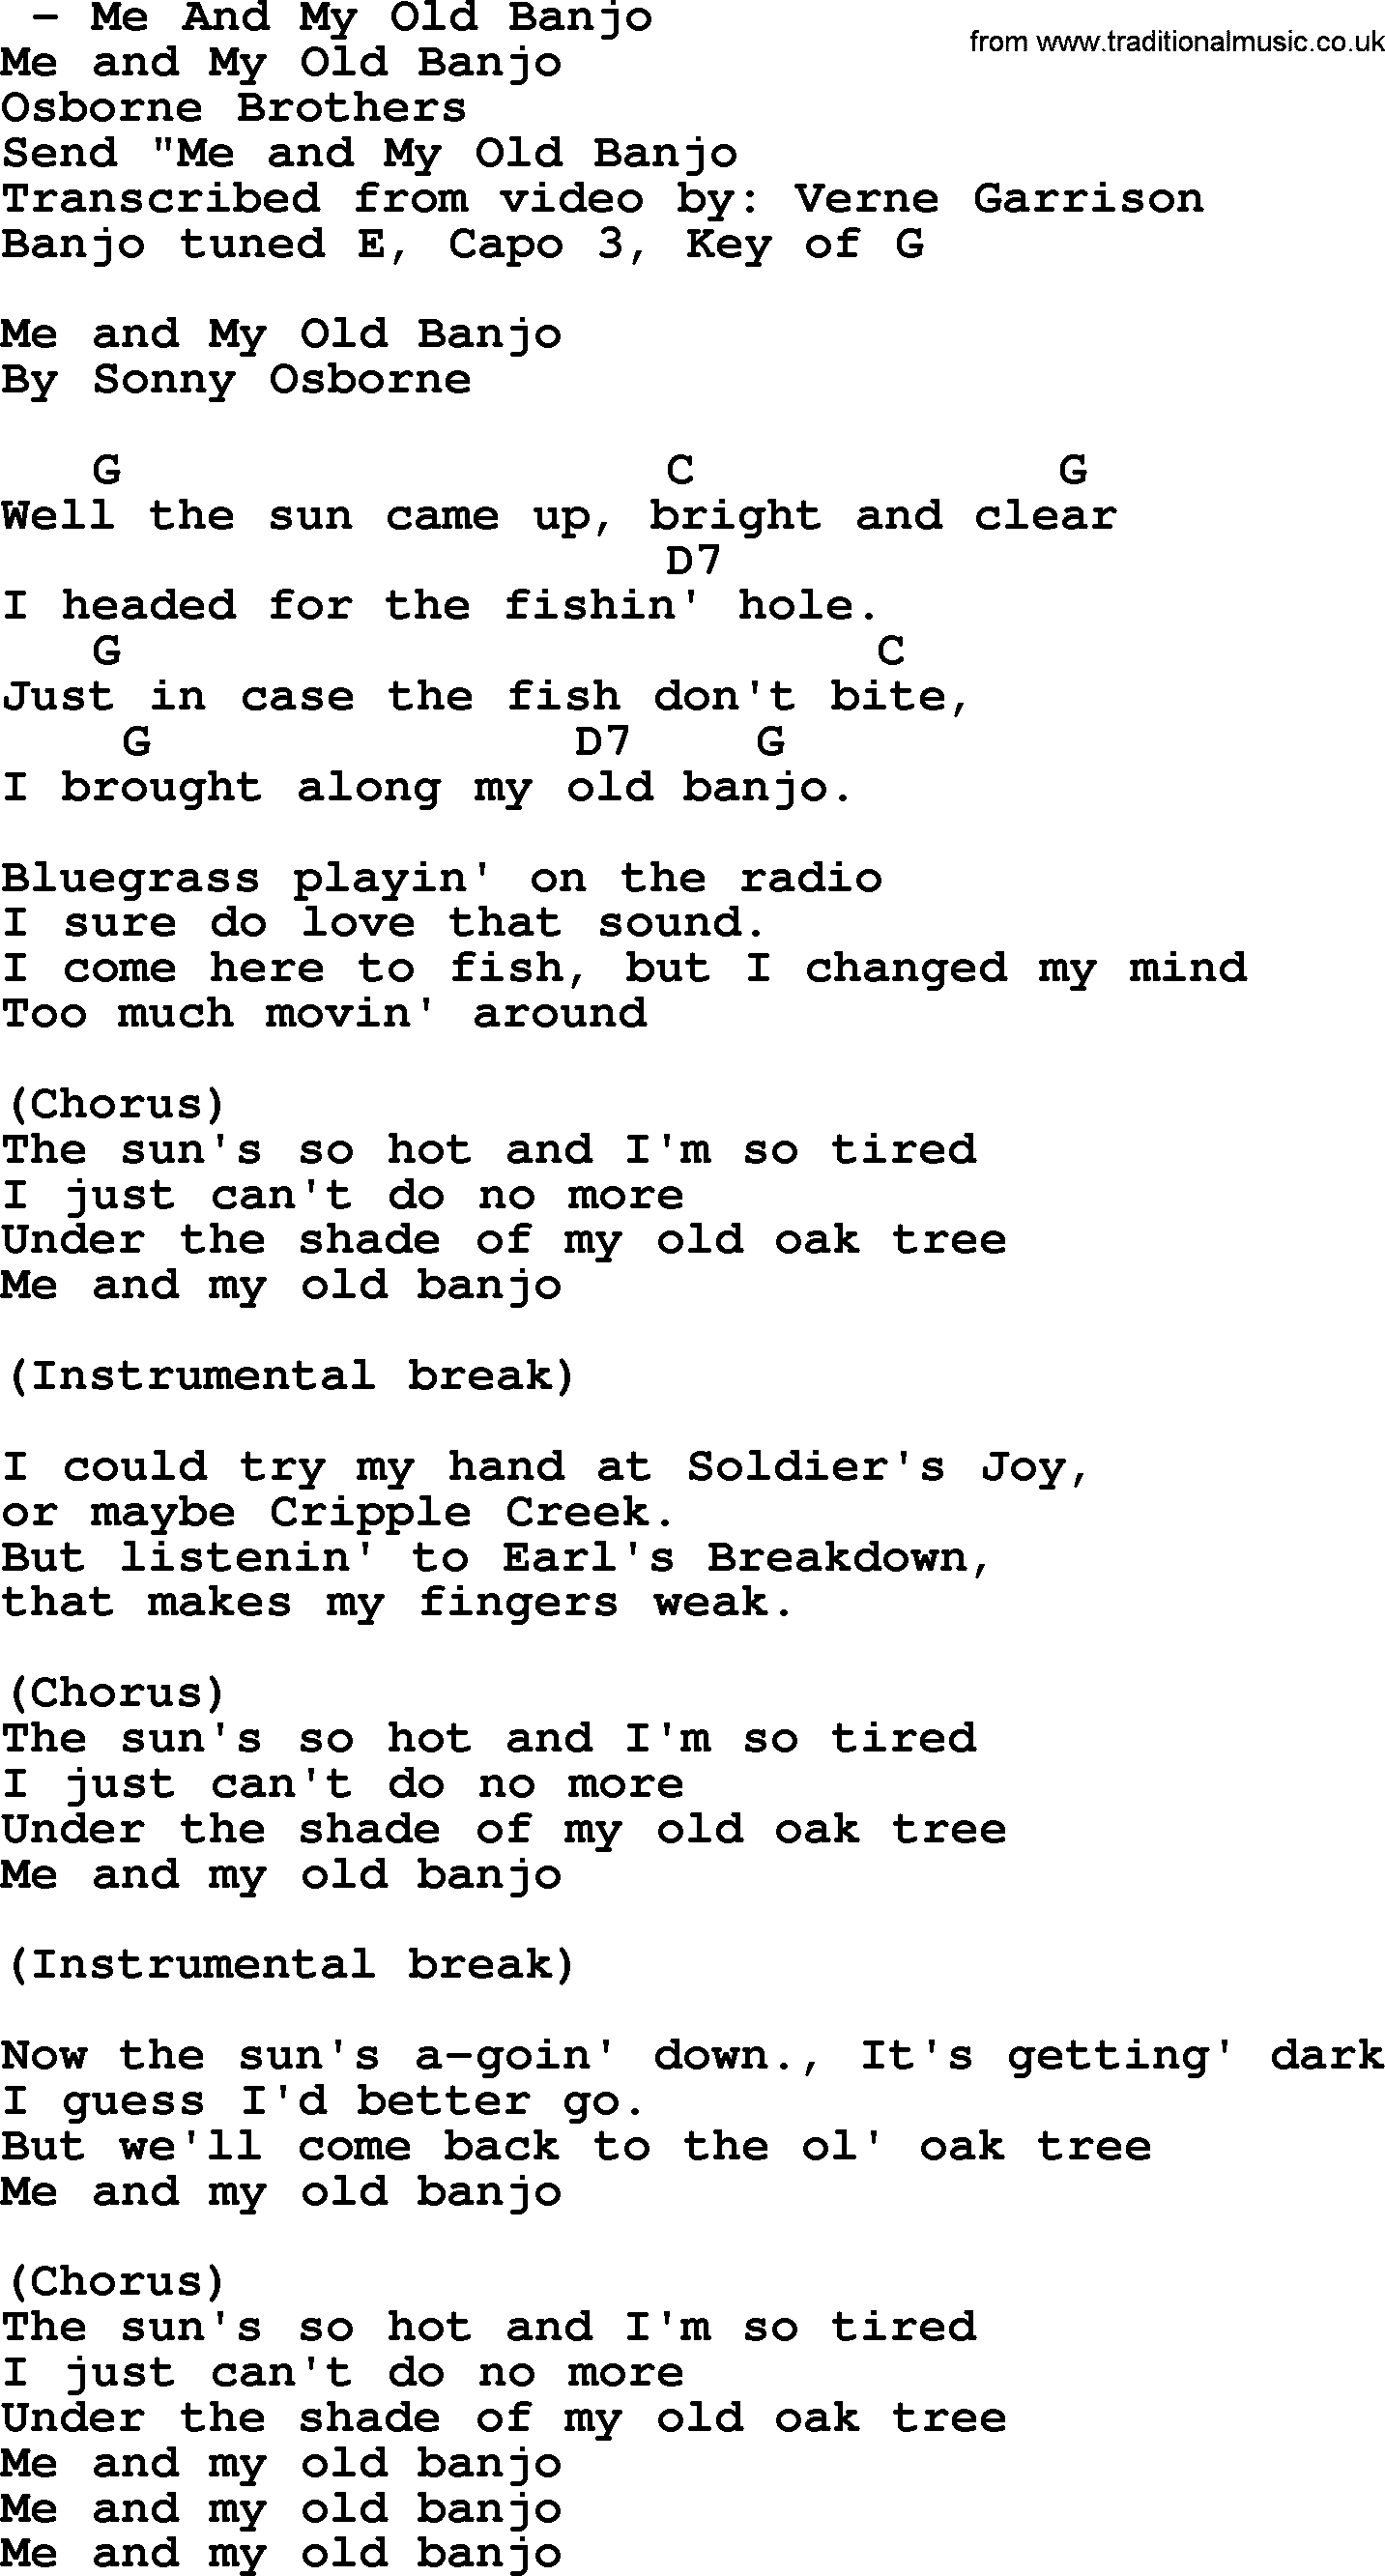 Bluegrass song: Me And My Old Banjo, lyrics and chords